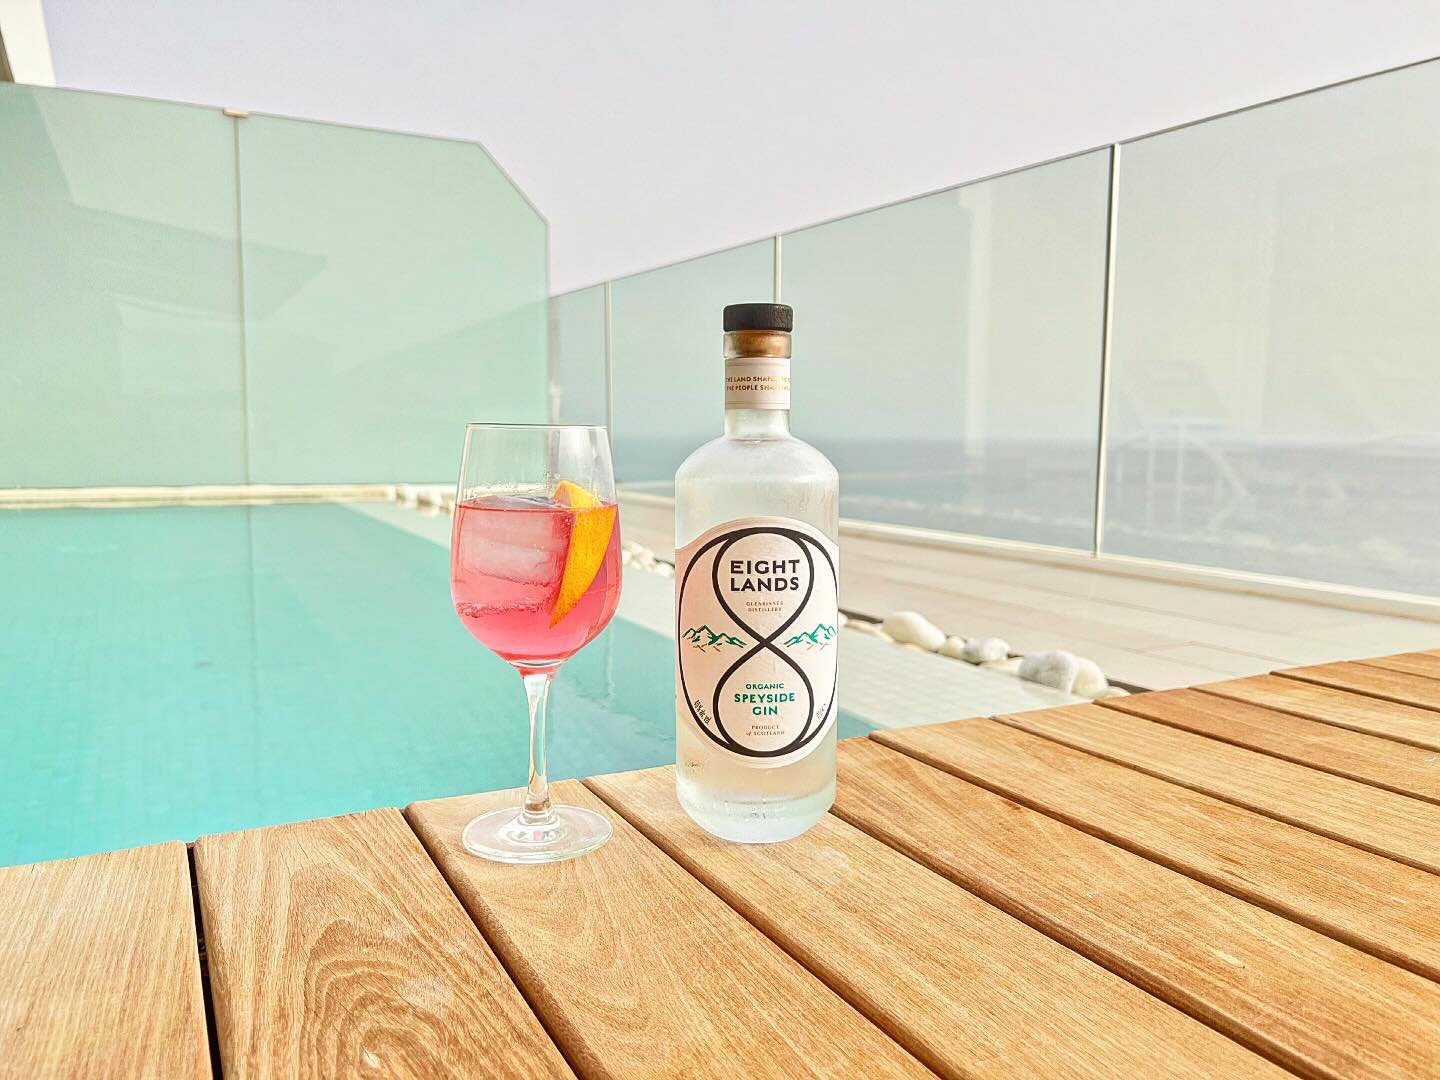 Often distilled in the cold. Often enjoyed in the sun. ☀️Wherever and however, make sure you upgrade your drinking experience with our award-winning, organic spirits. 
-
#vodka #gin #organic #speyside #scotland #holiday #summer #sunshine #poolside #c